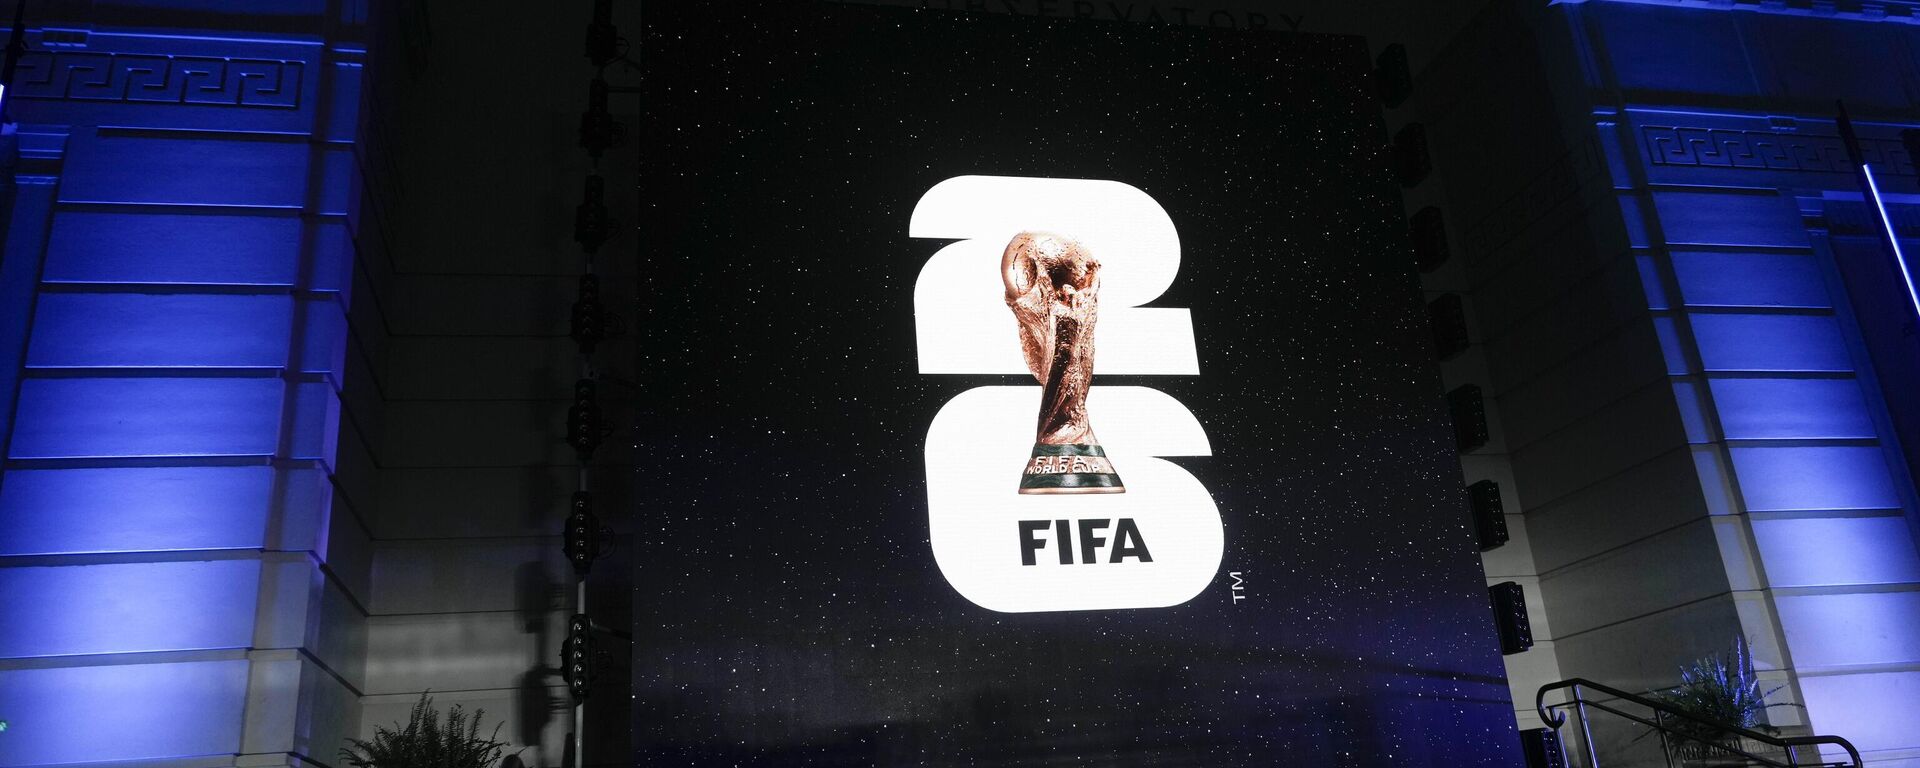 The logo for the 2026 World Cup is shown on a screen outside Griffith Observatory in Los Angeles on Wednesday, May 17, 2023. A unique 2030 World Cup is set to be played in Europe and Africa with the surprising addition of South America in a deal to allow the men’s soccer tournament to start with a 100th birthday party in Uruguay. - Sputnik Africa, 1920, 04.10.2023